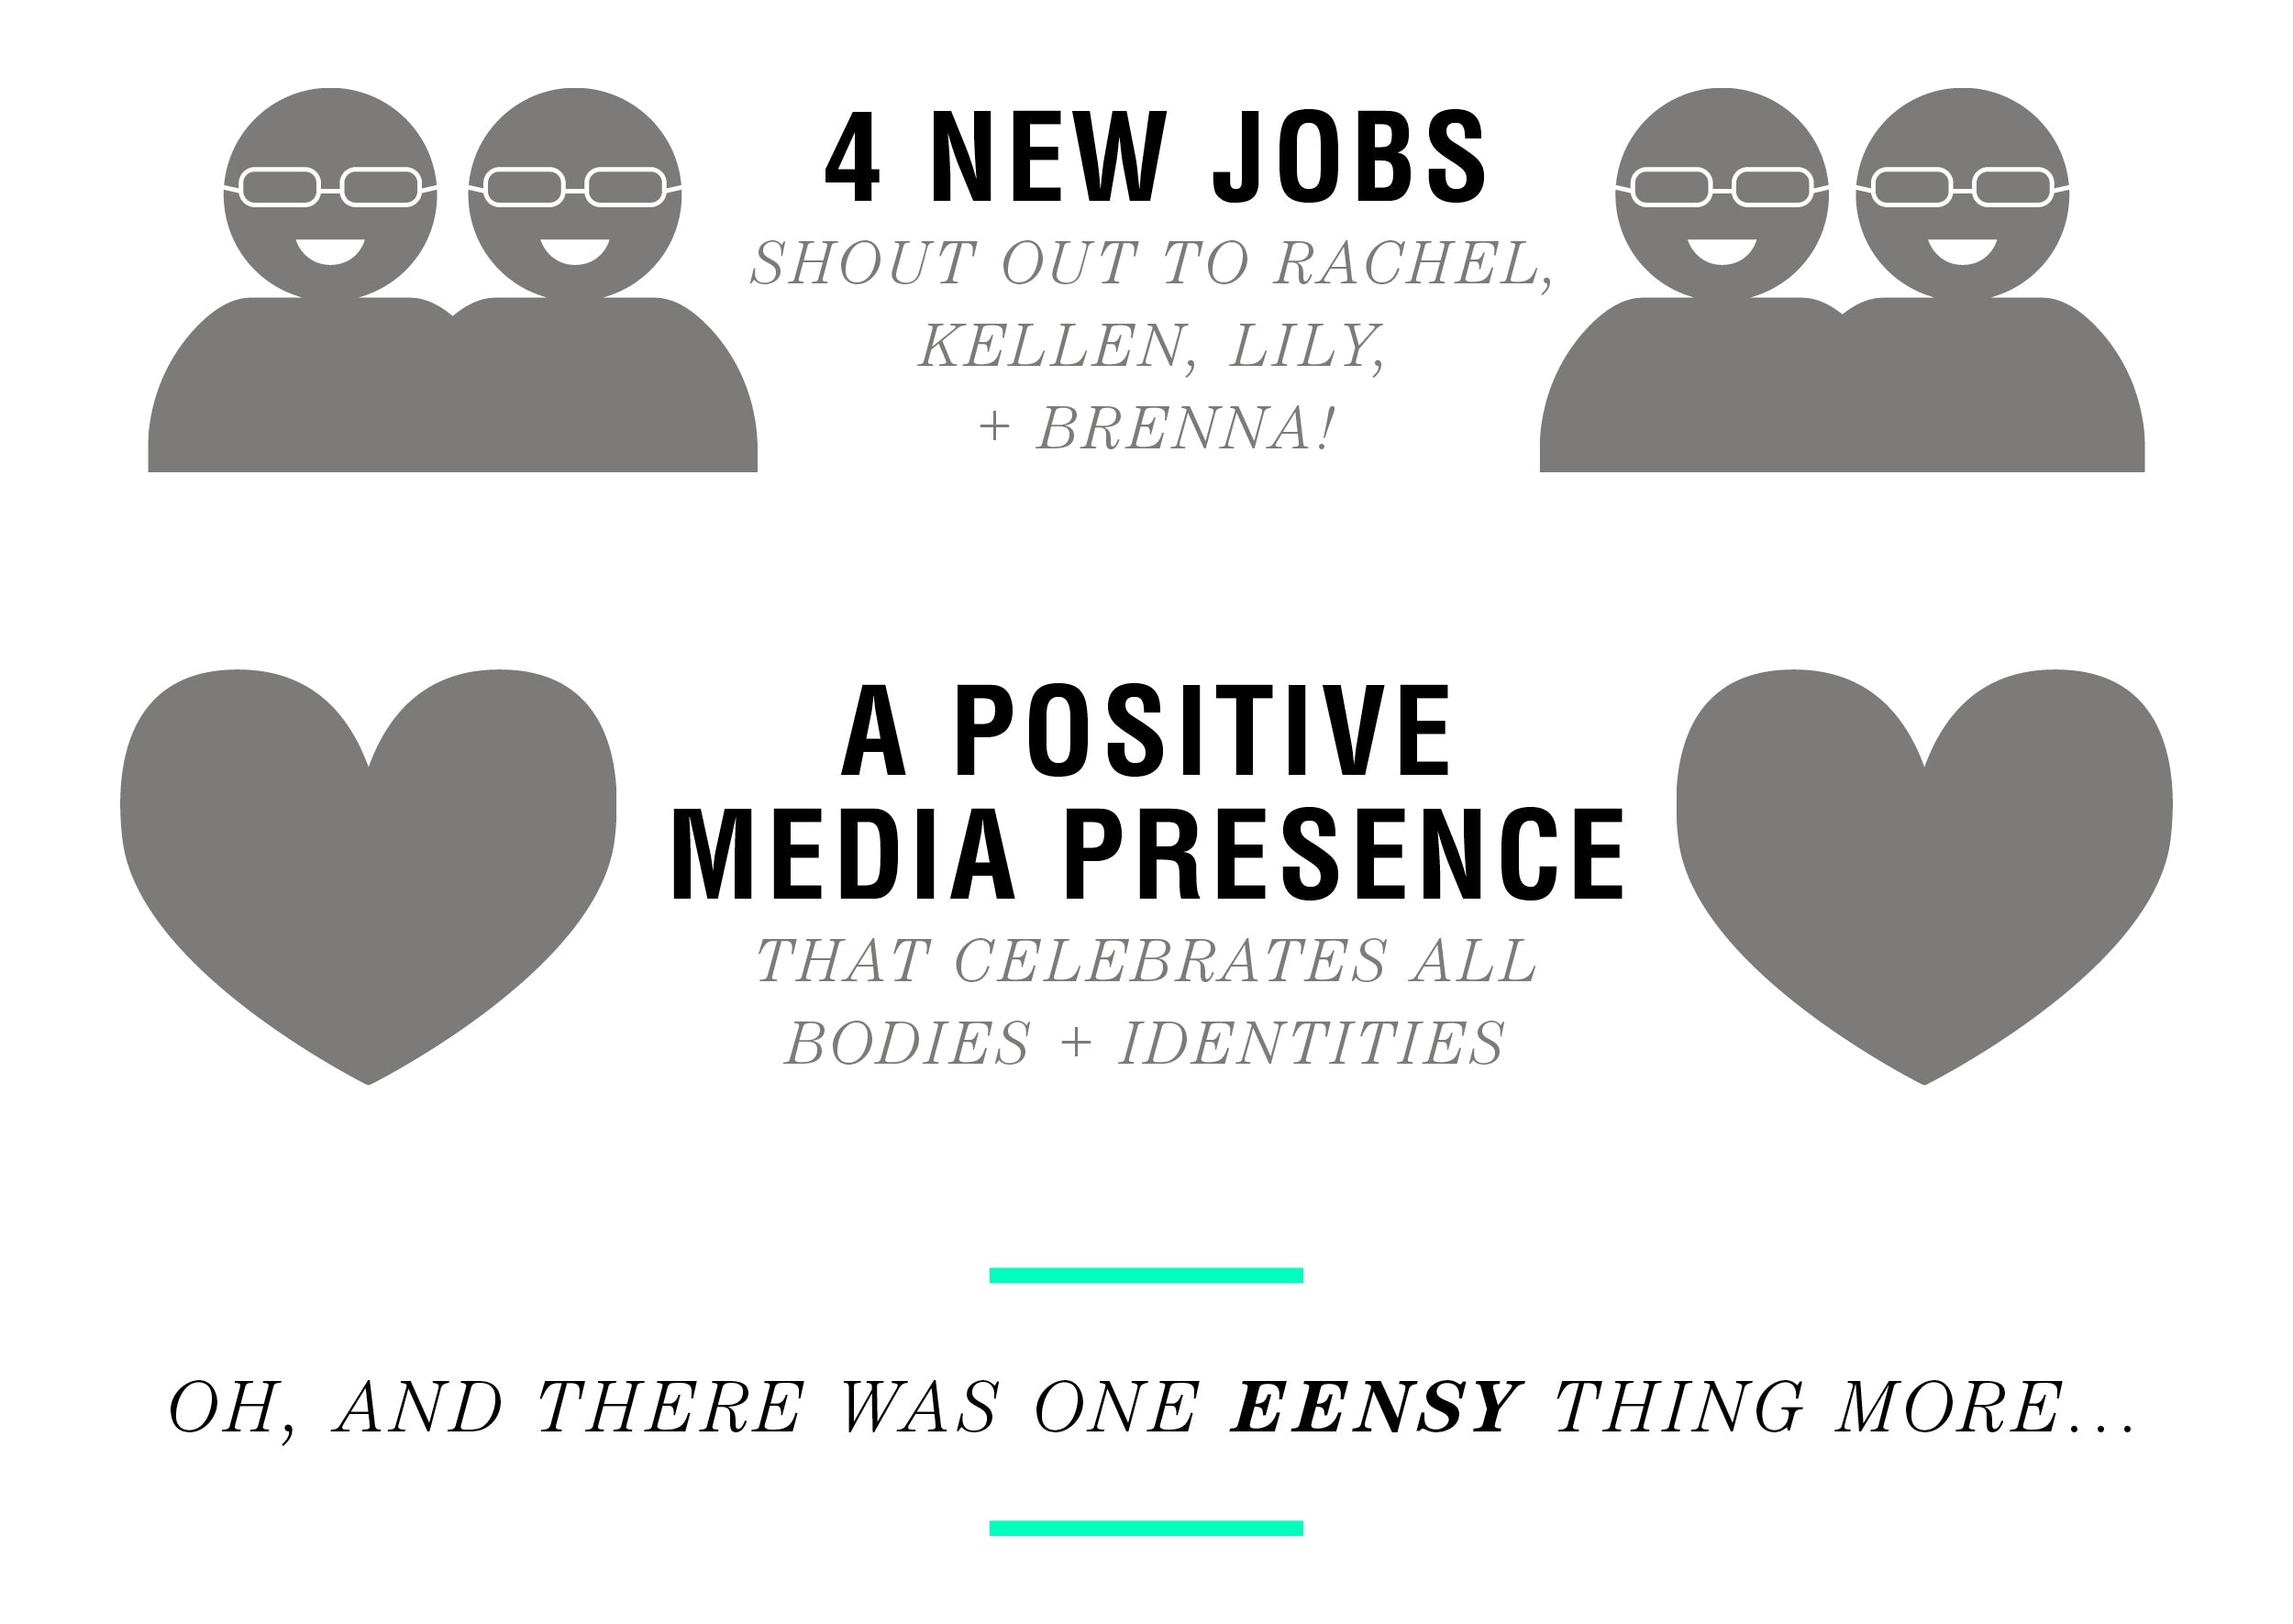 Four new jobs — shout out to Rachel, Kellen, Lily + Brenna! A positive media presence that celebrates all bodies + identities. Oh, and there was one eensy thing more…